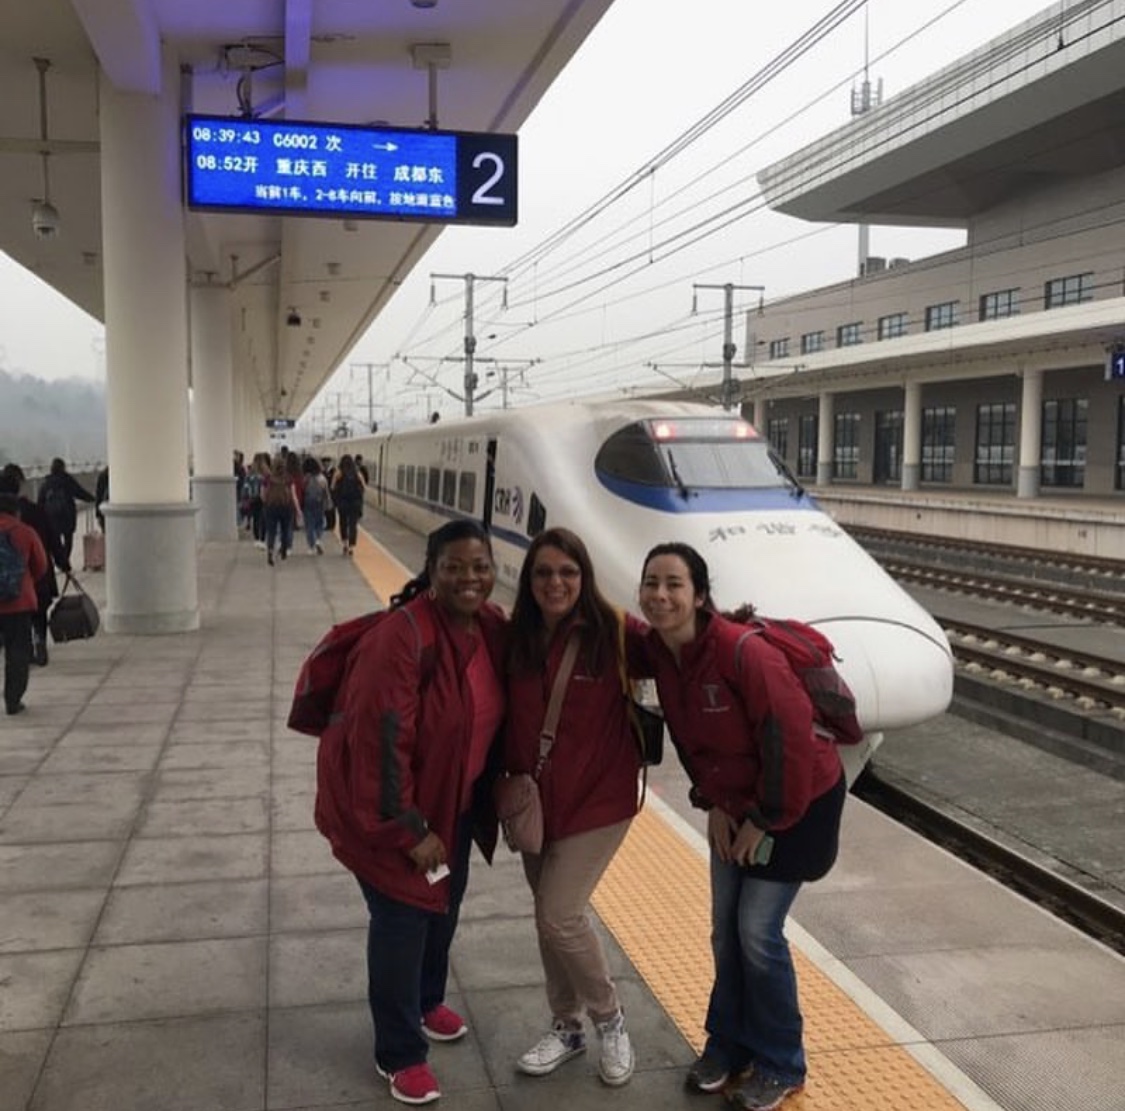 Dr. Price and her students getting ready to board the bullet train in China